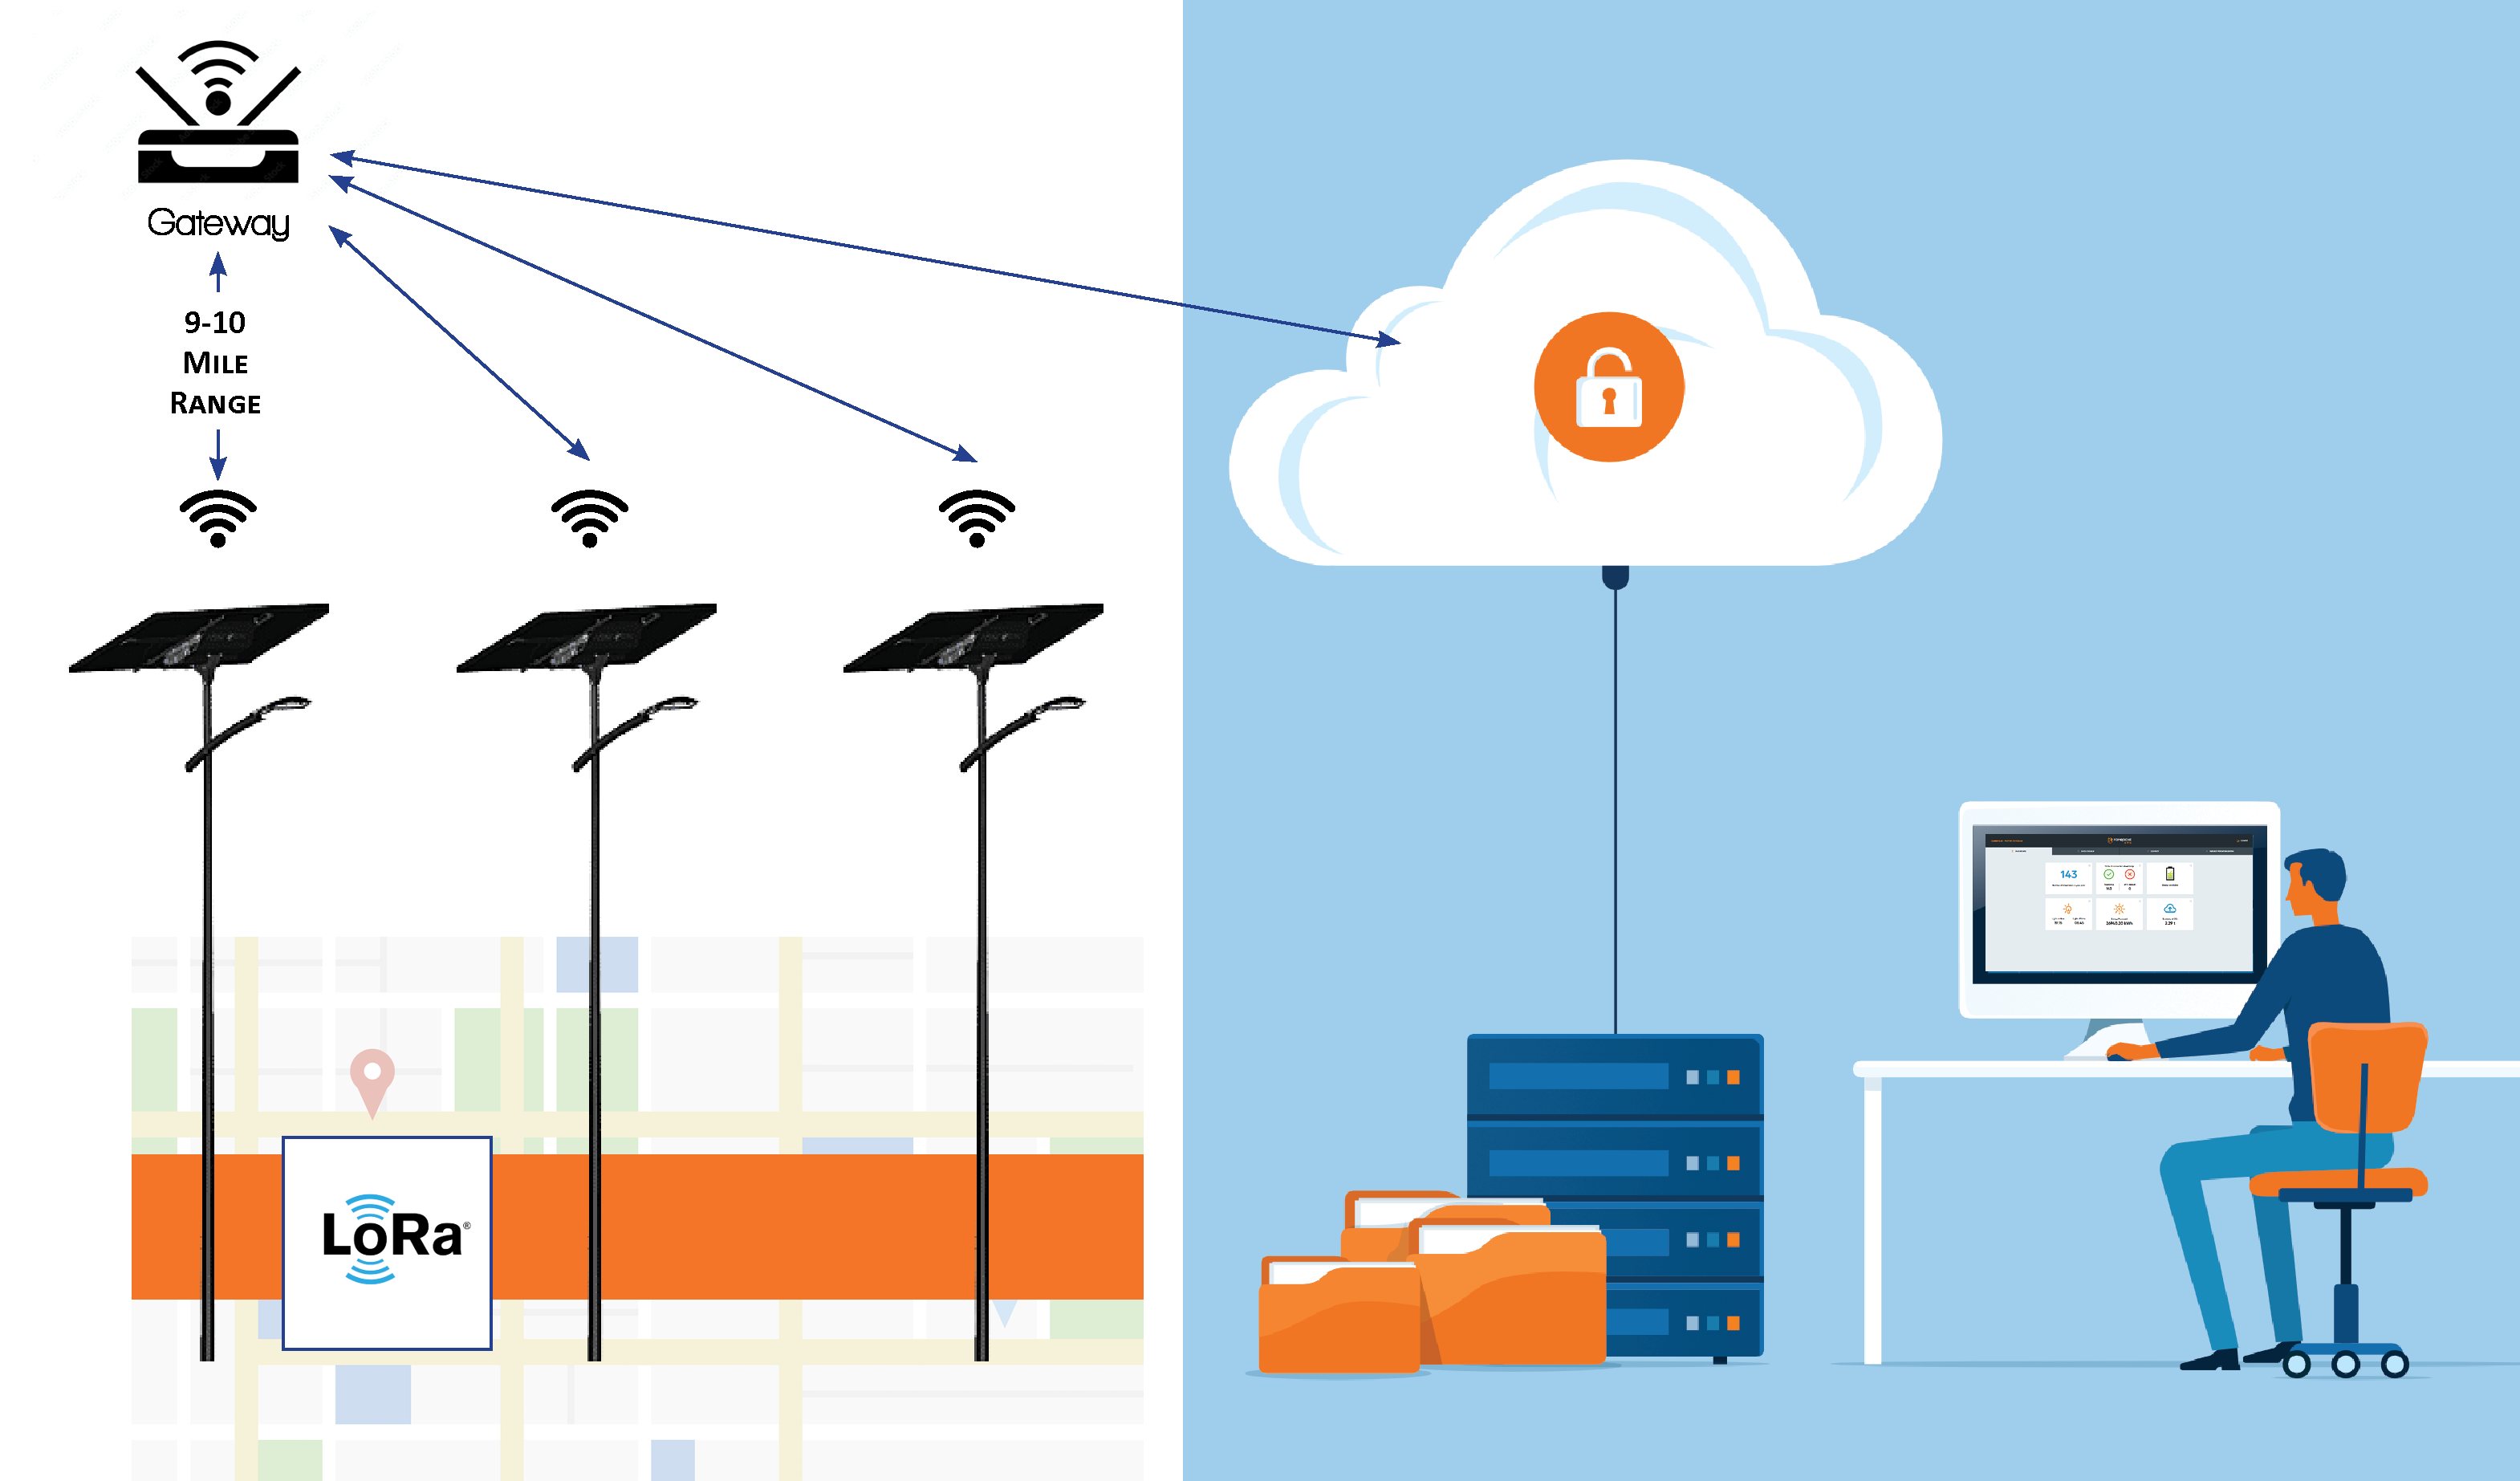 Illustration of SmartLights Connected to Cloud